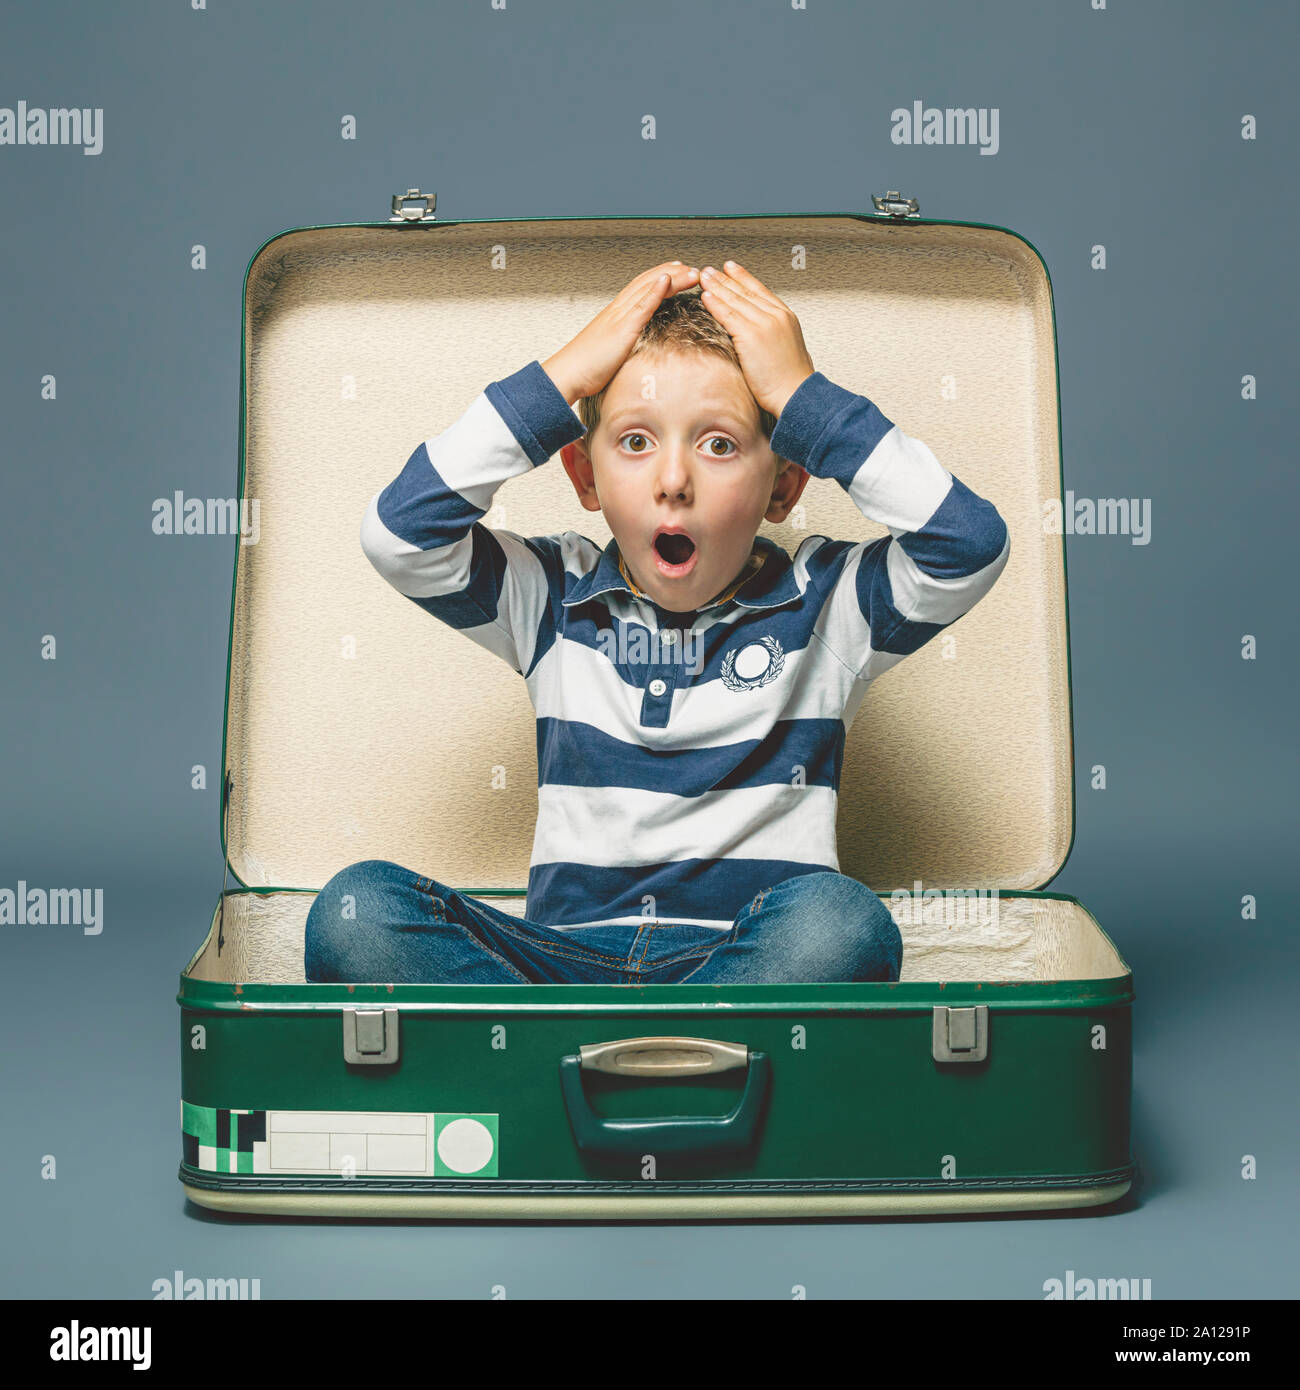 studio portrait of a 6 year old boy with a surprised expression sitting inside a vintage suitcase. Stock Photo